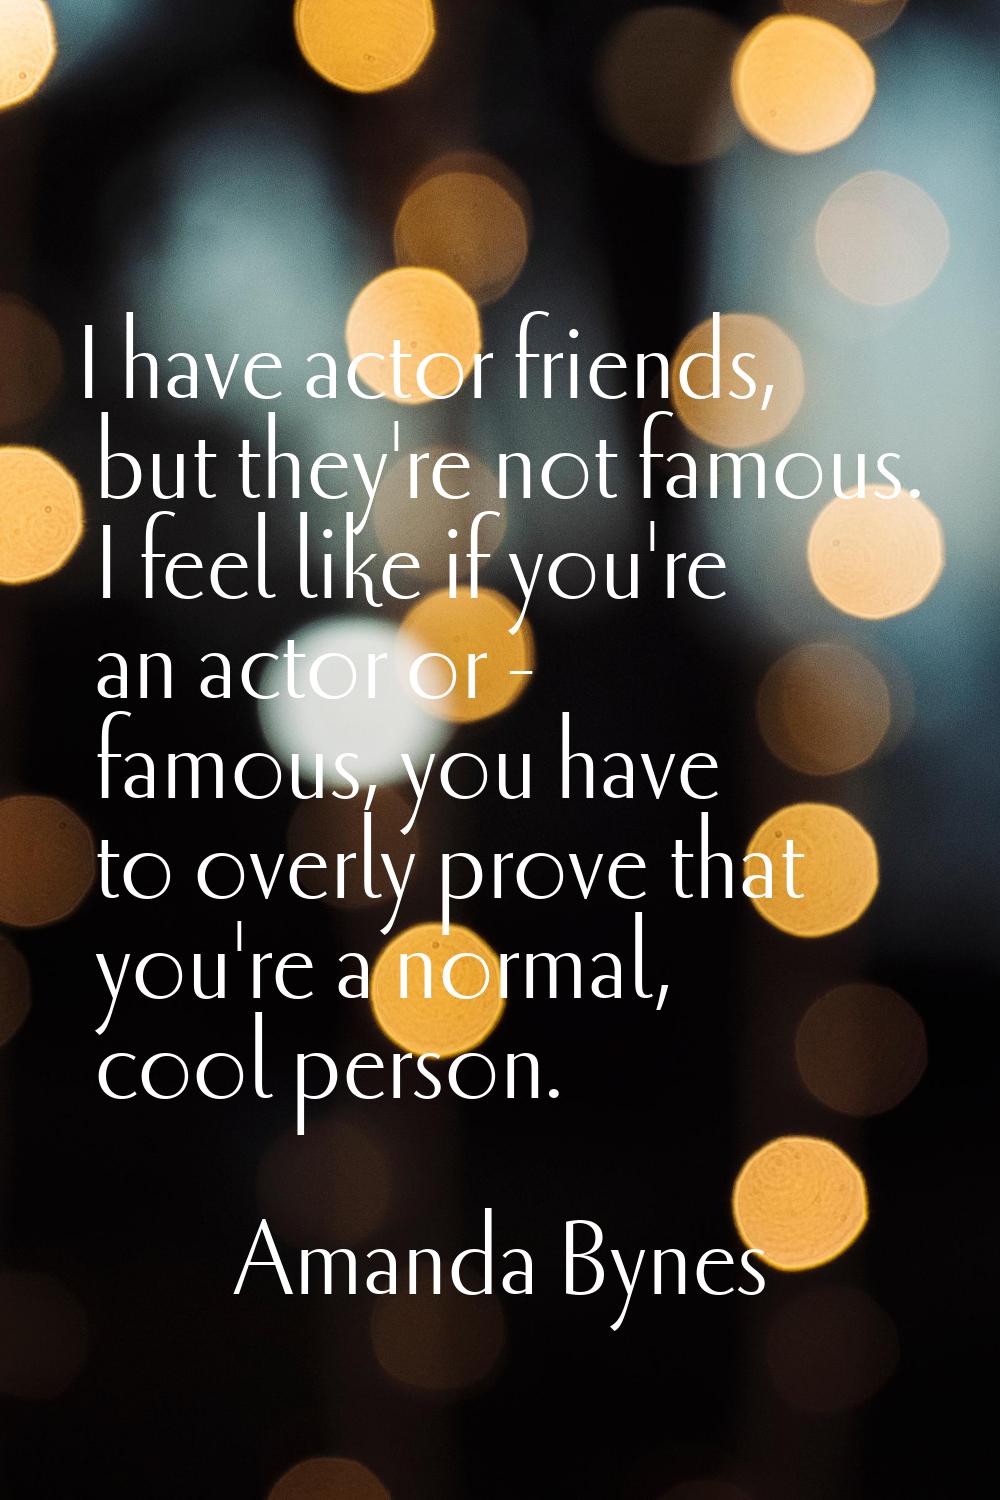 I have actor friends, but they're not famous. I feel like if you're an actor or - famous, you have 